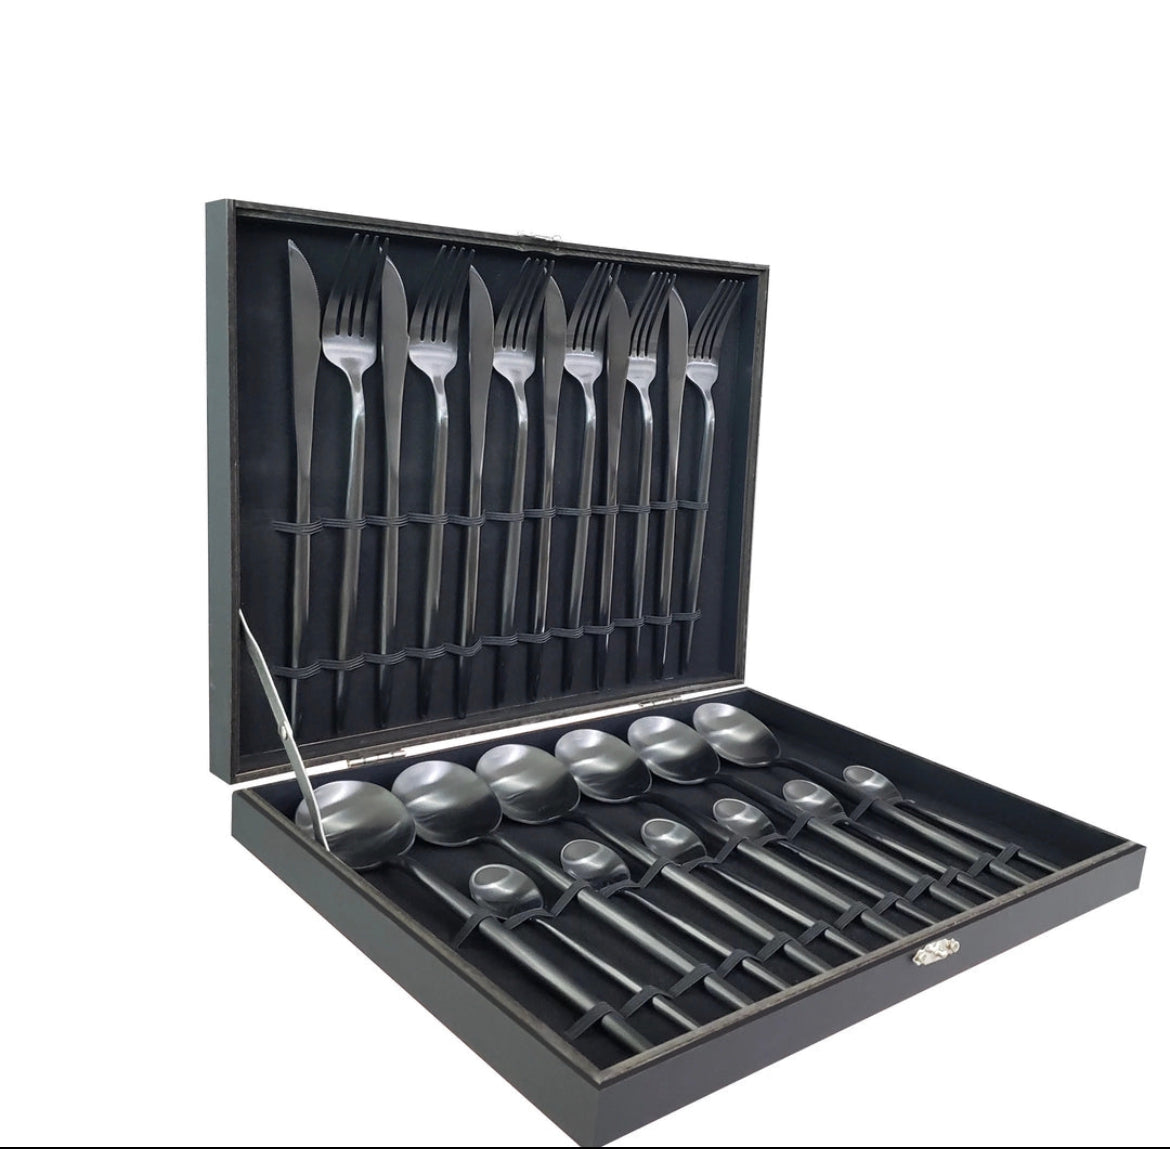 Black Stainless-Steel Cutlery set for 6 Person